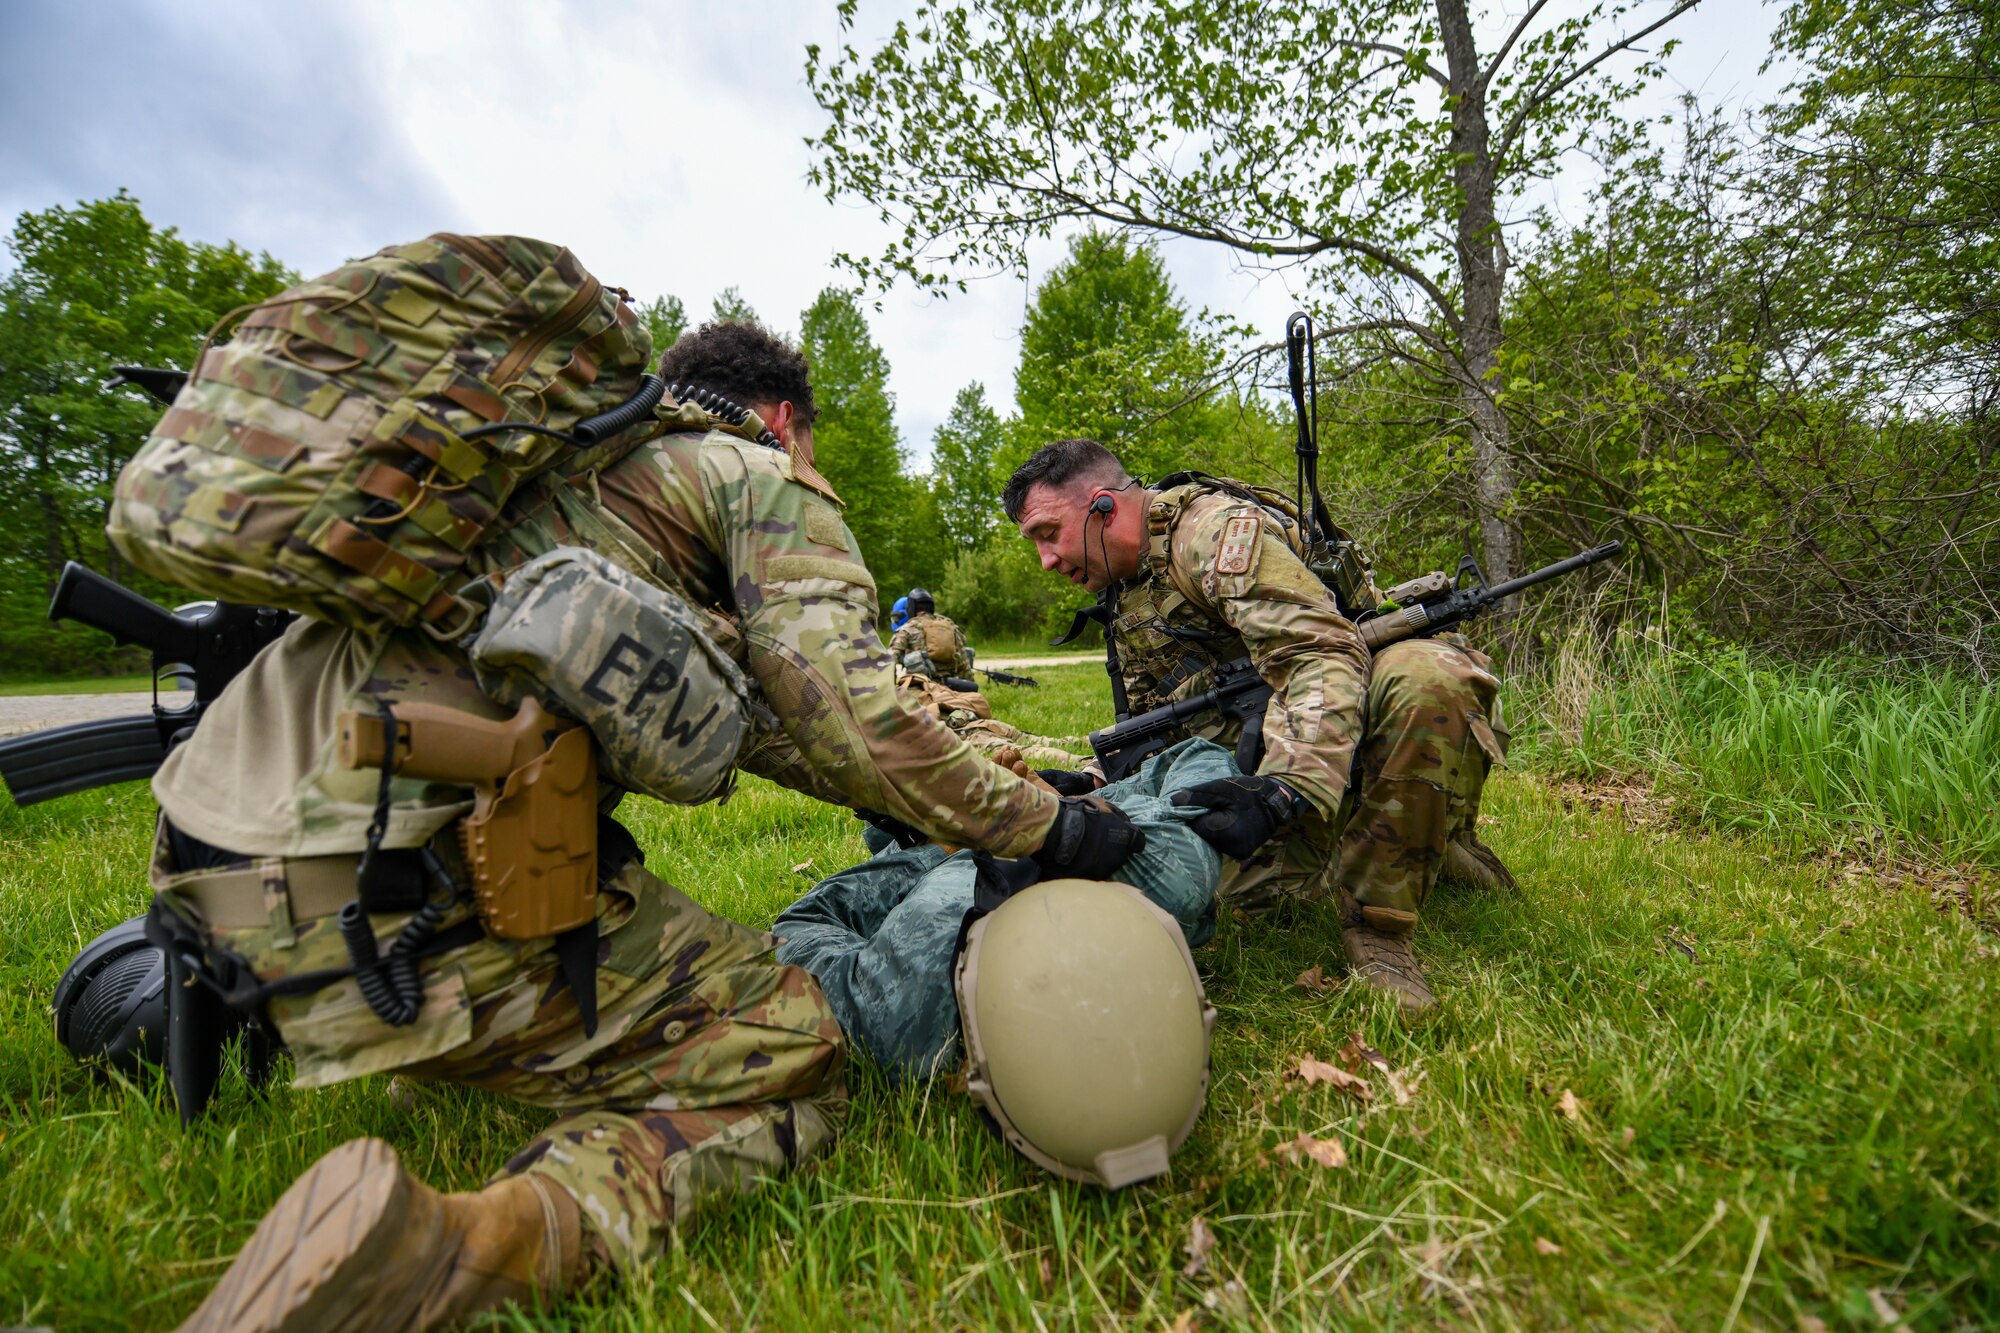 Tech. Sgt. Tim Caudle and Senior Airman Chris Brosius, both members of 914th Security Forces Squadron, Niagara Falls Air Reserve Station, New York, search an opposing force member for intel during an area security operations exercise at the Integrated Defense Leadership Course at Camp James A. Garfield Joint Military Training Center, Ohio, May 19, 2023.